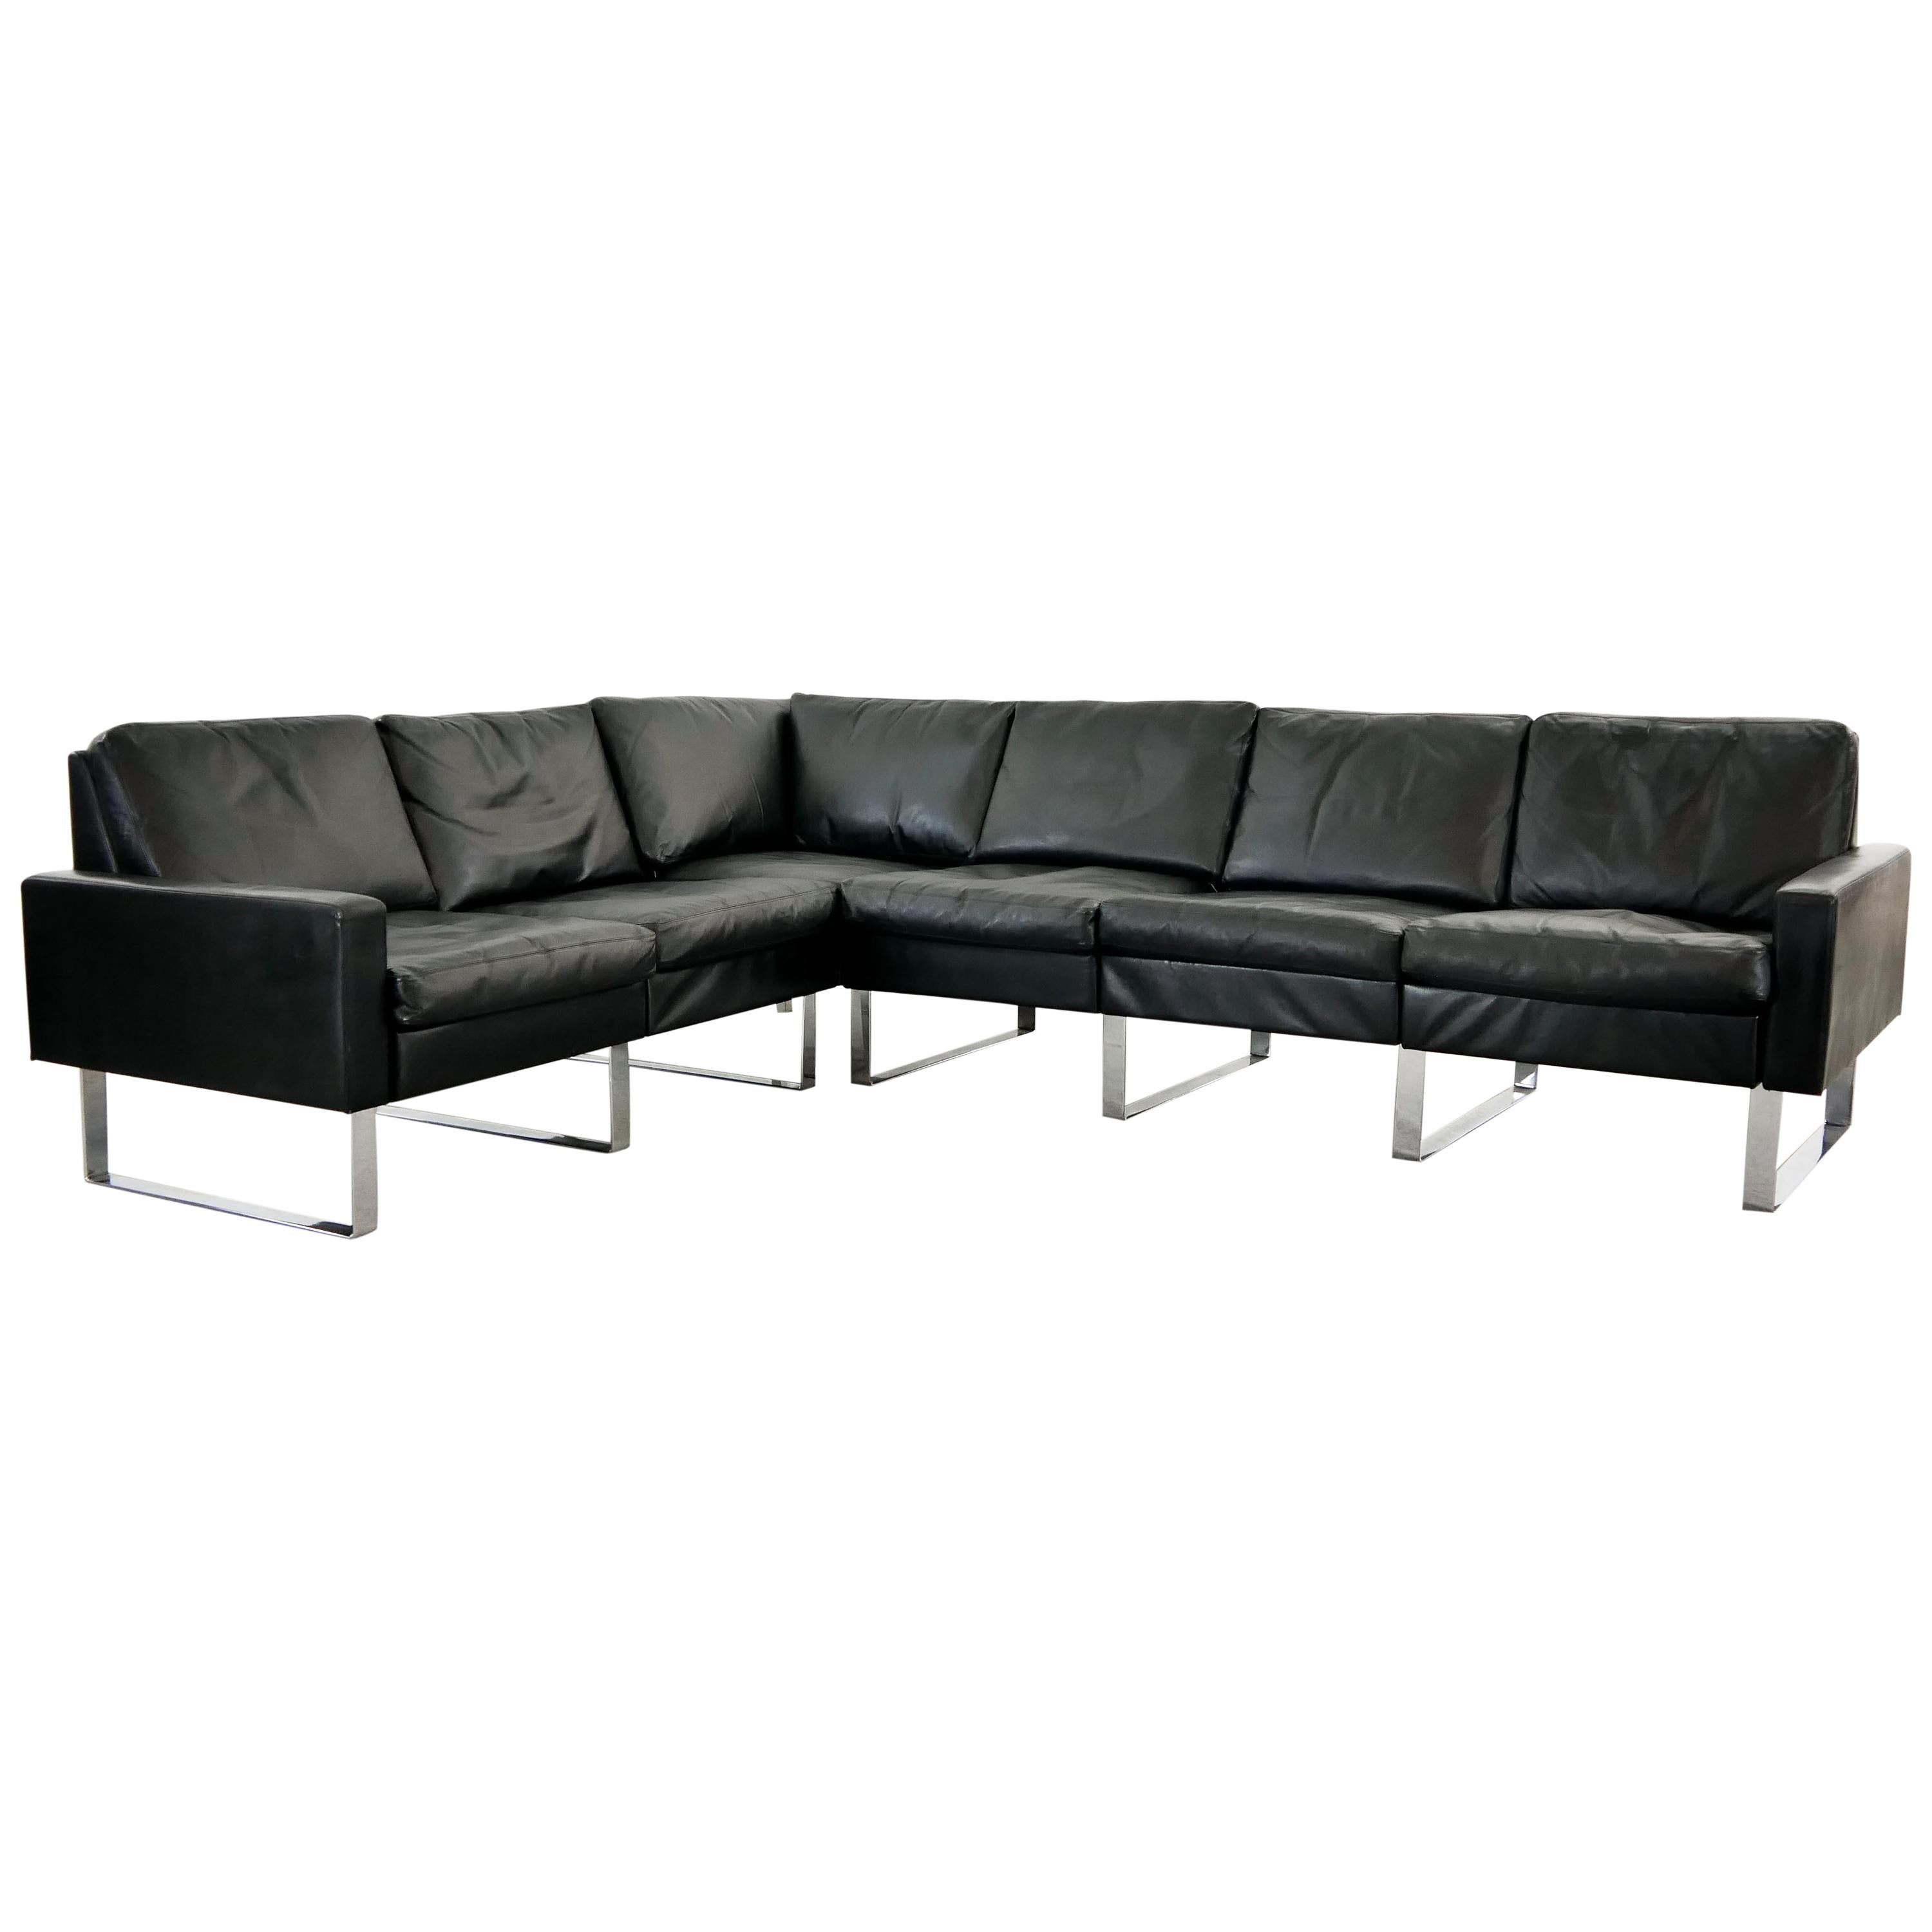 Sectional Modular Conseta Sofa on Runners by COR, Germany in Black Leather 